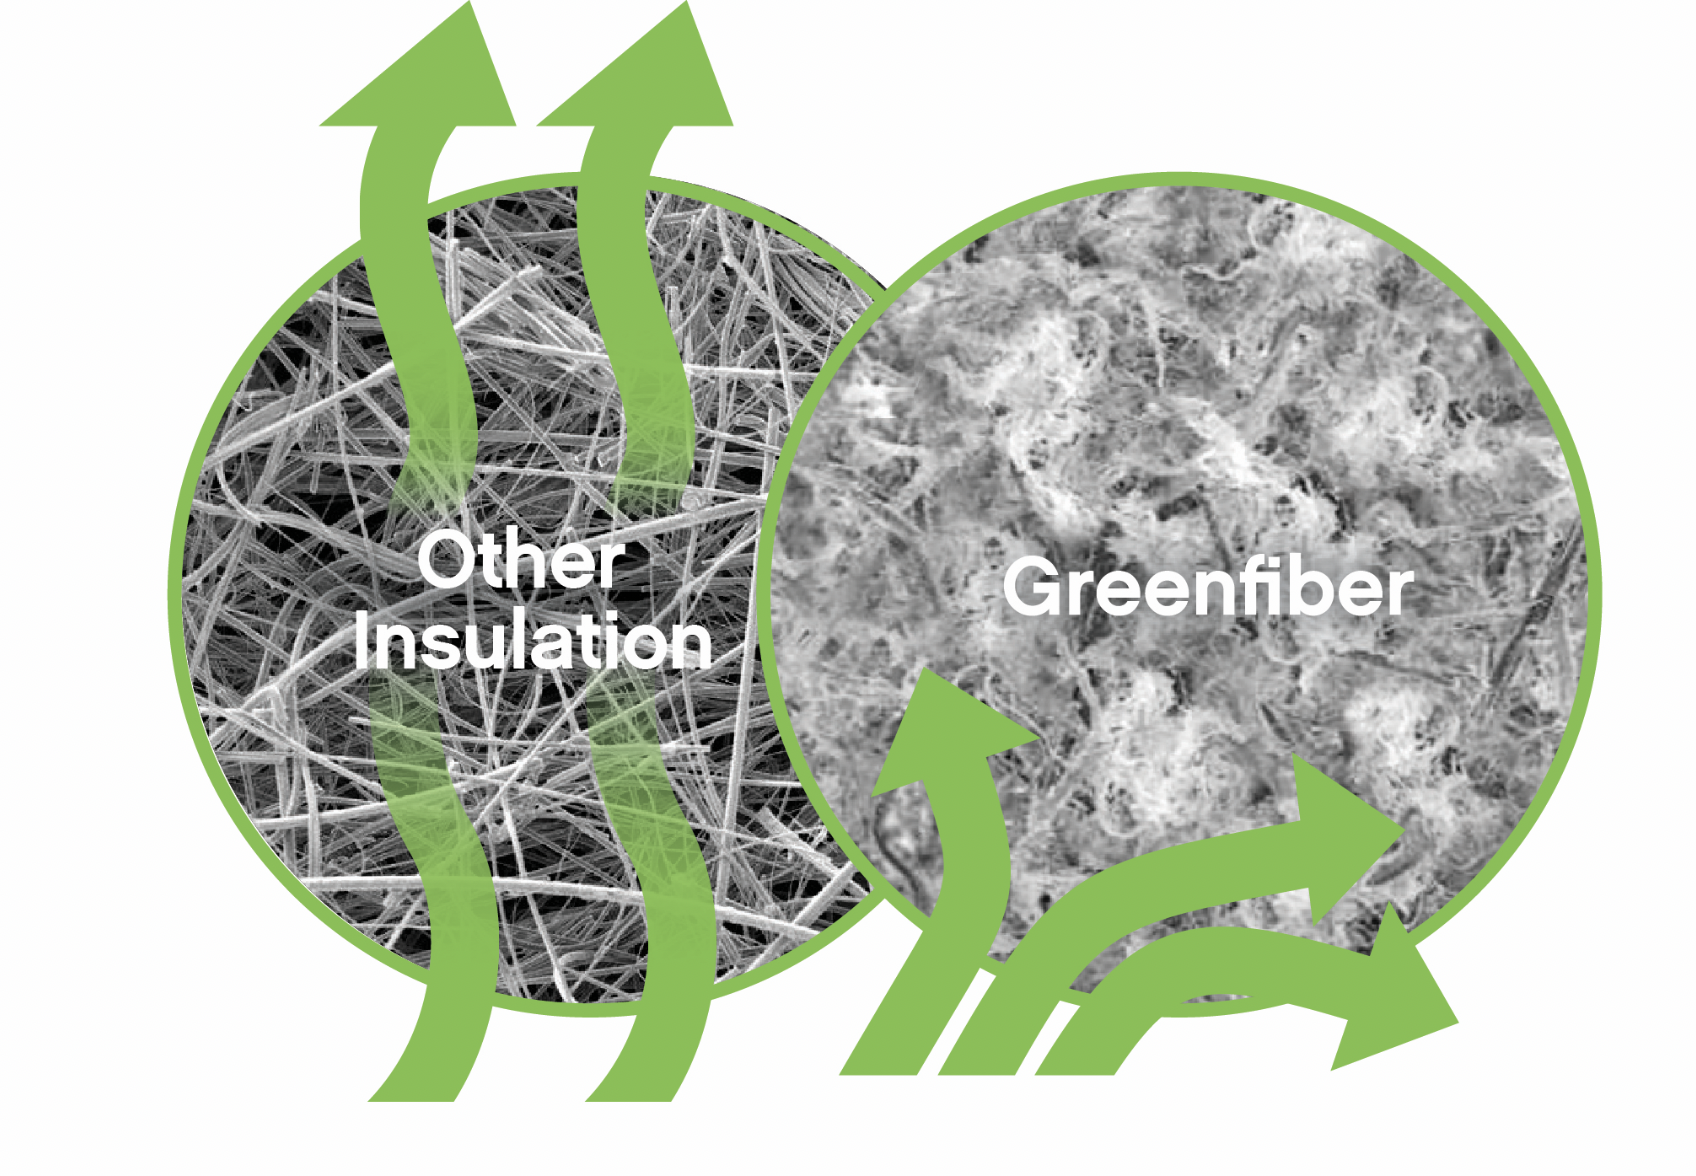 graphic comparing the density of greenfiber cellulose insulation to other insulation types 